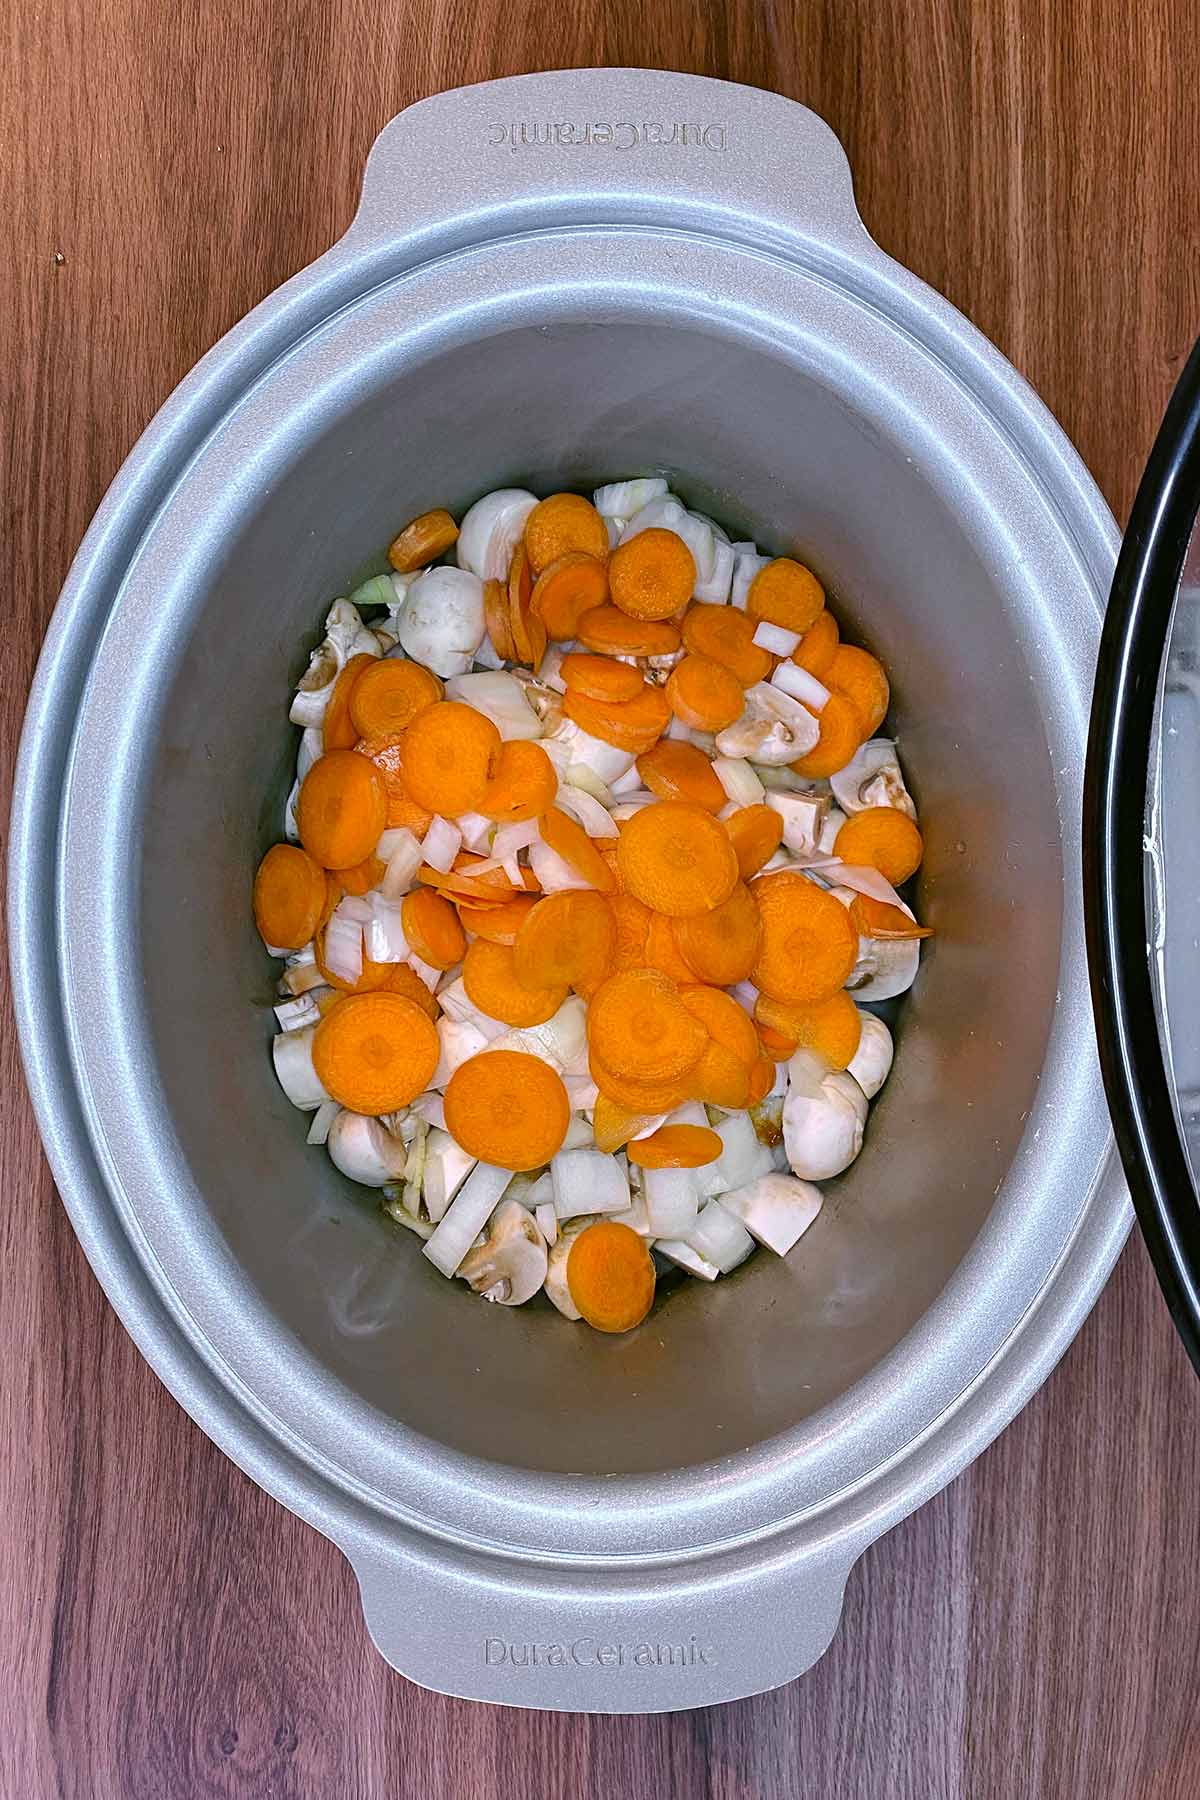 Chopped carrot, onion and mushrooms added to the slow cooker.